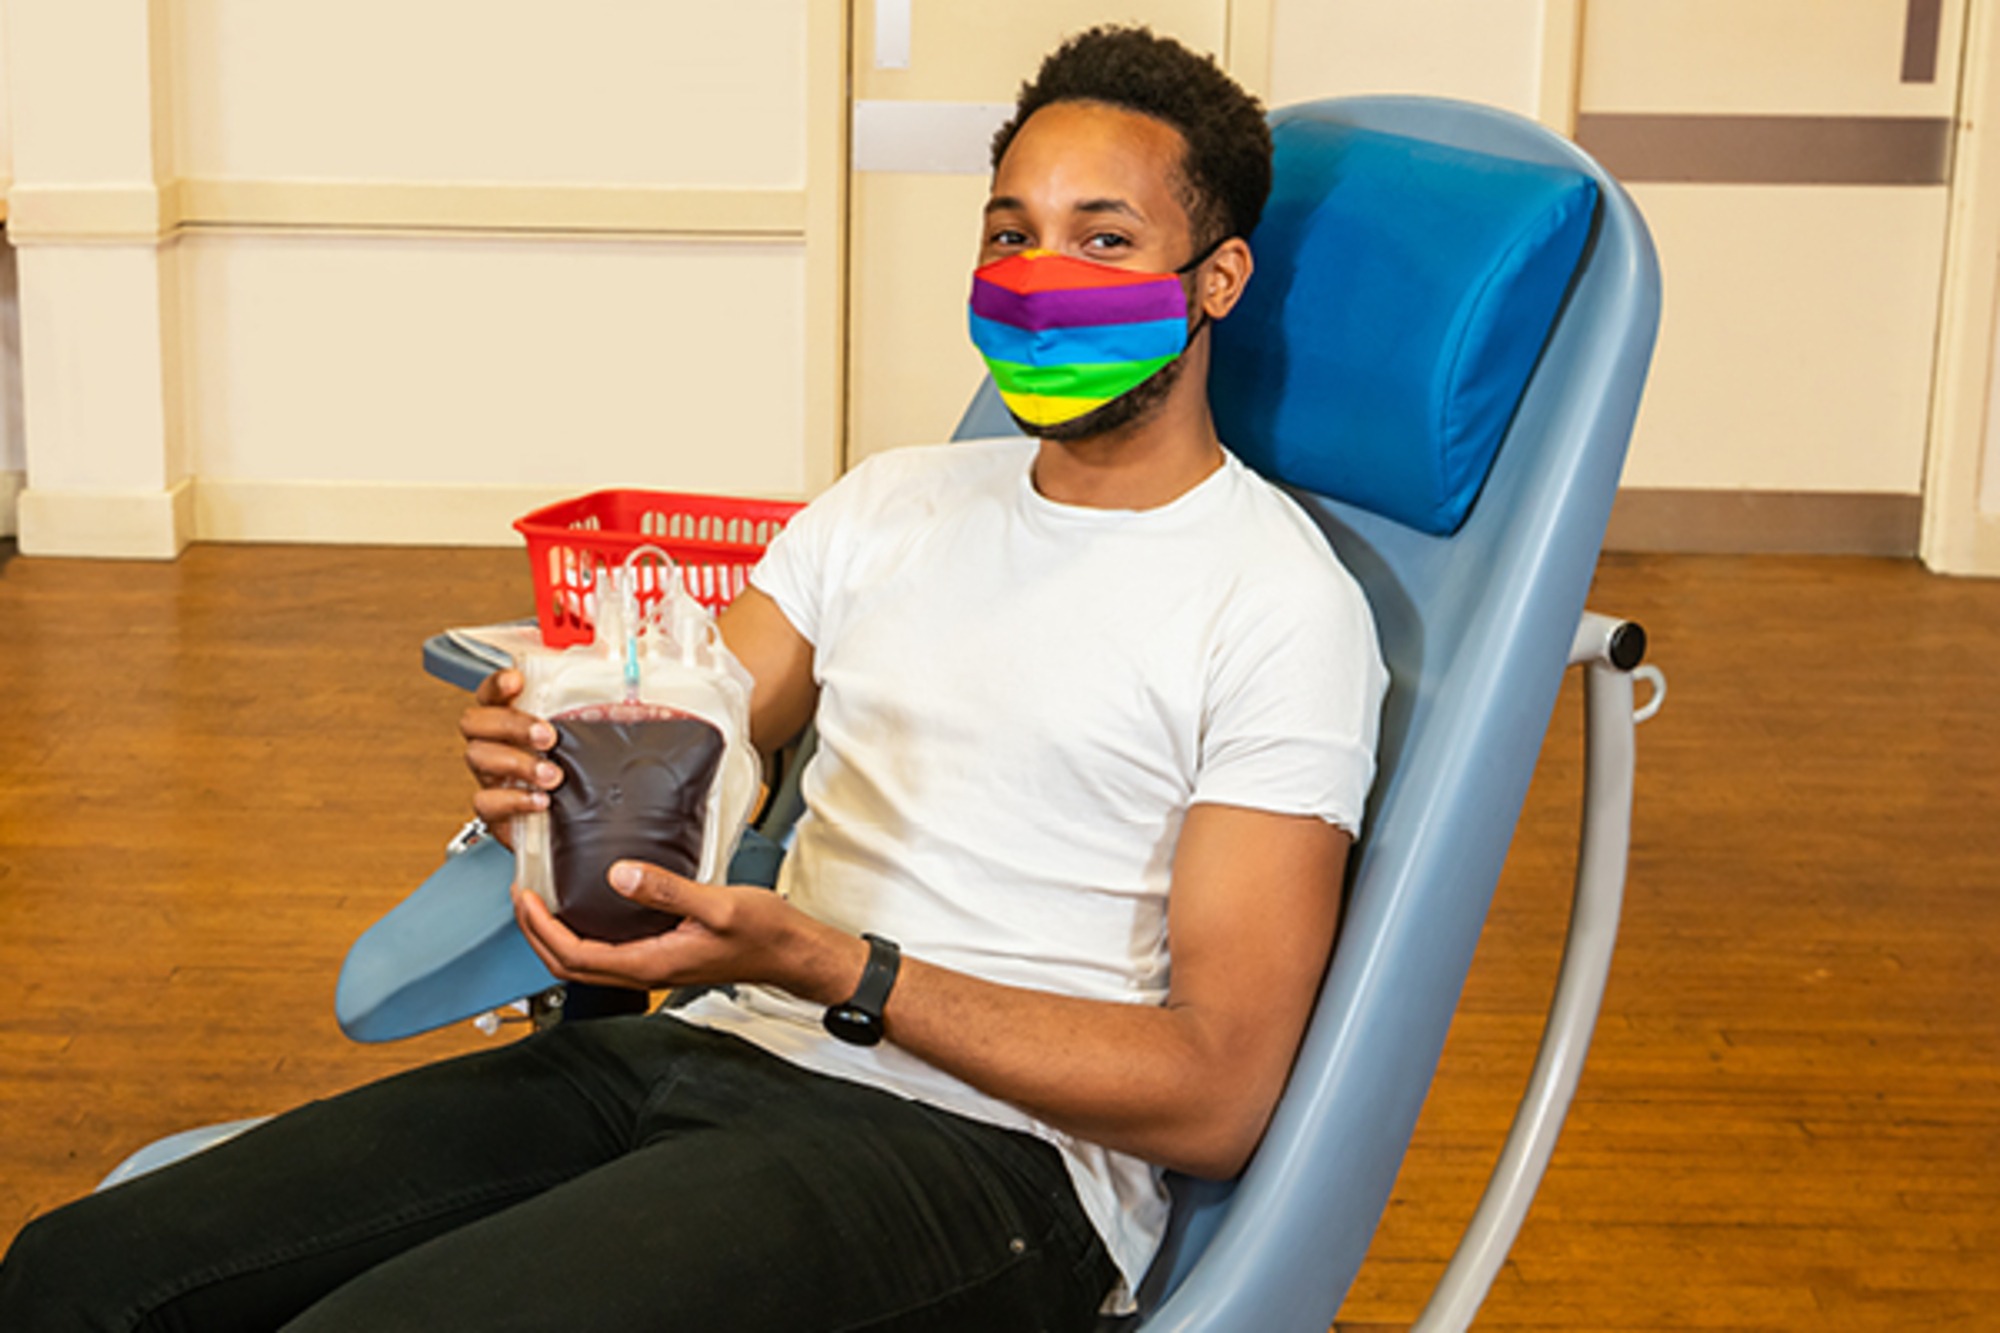 Gay men donating blood in the UK